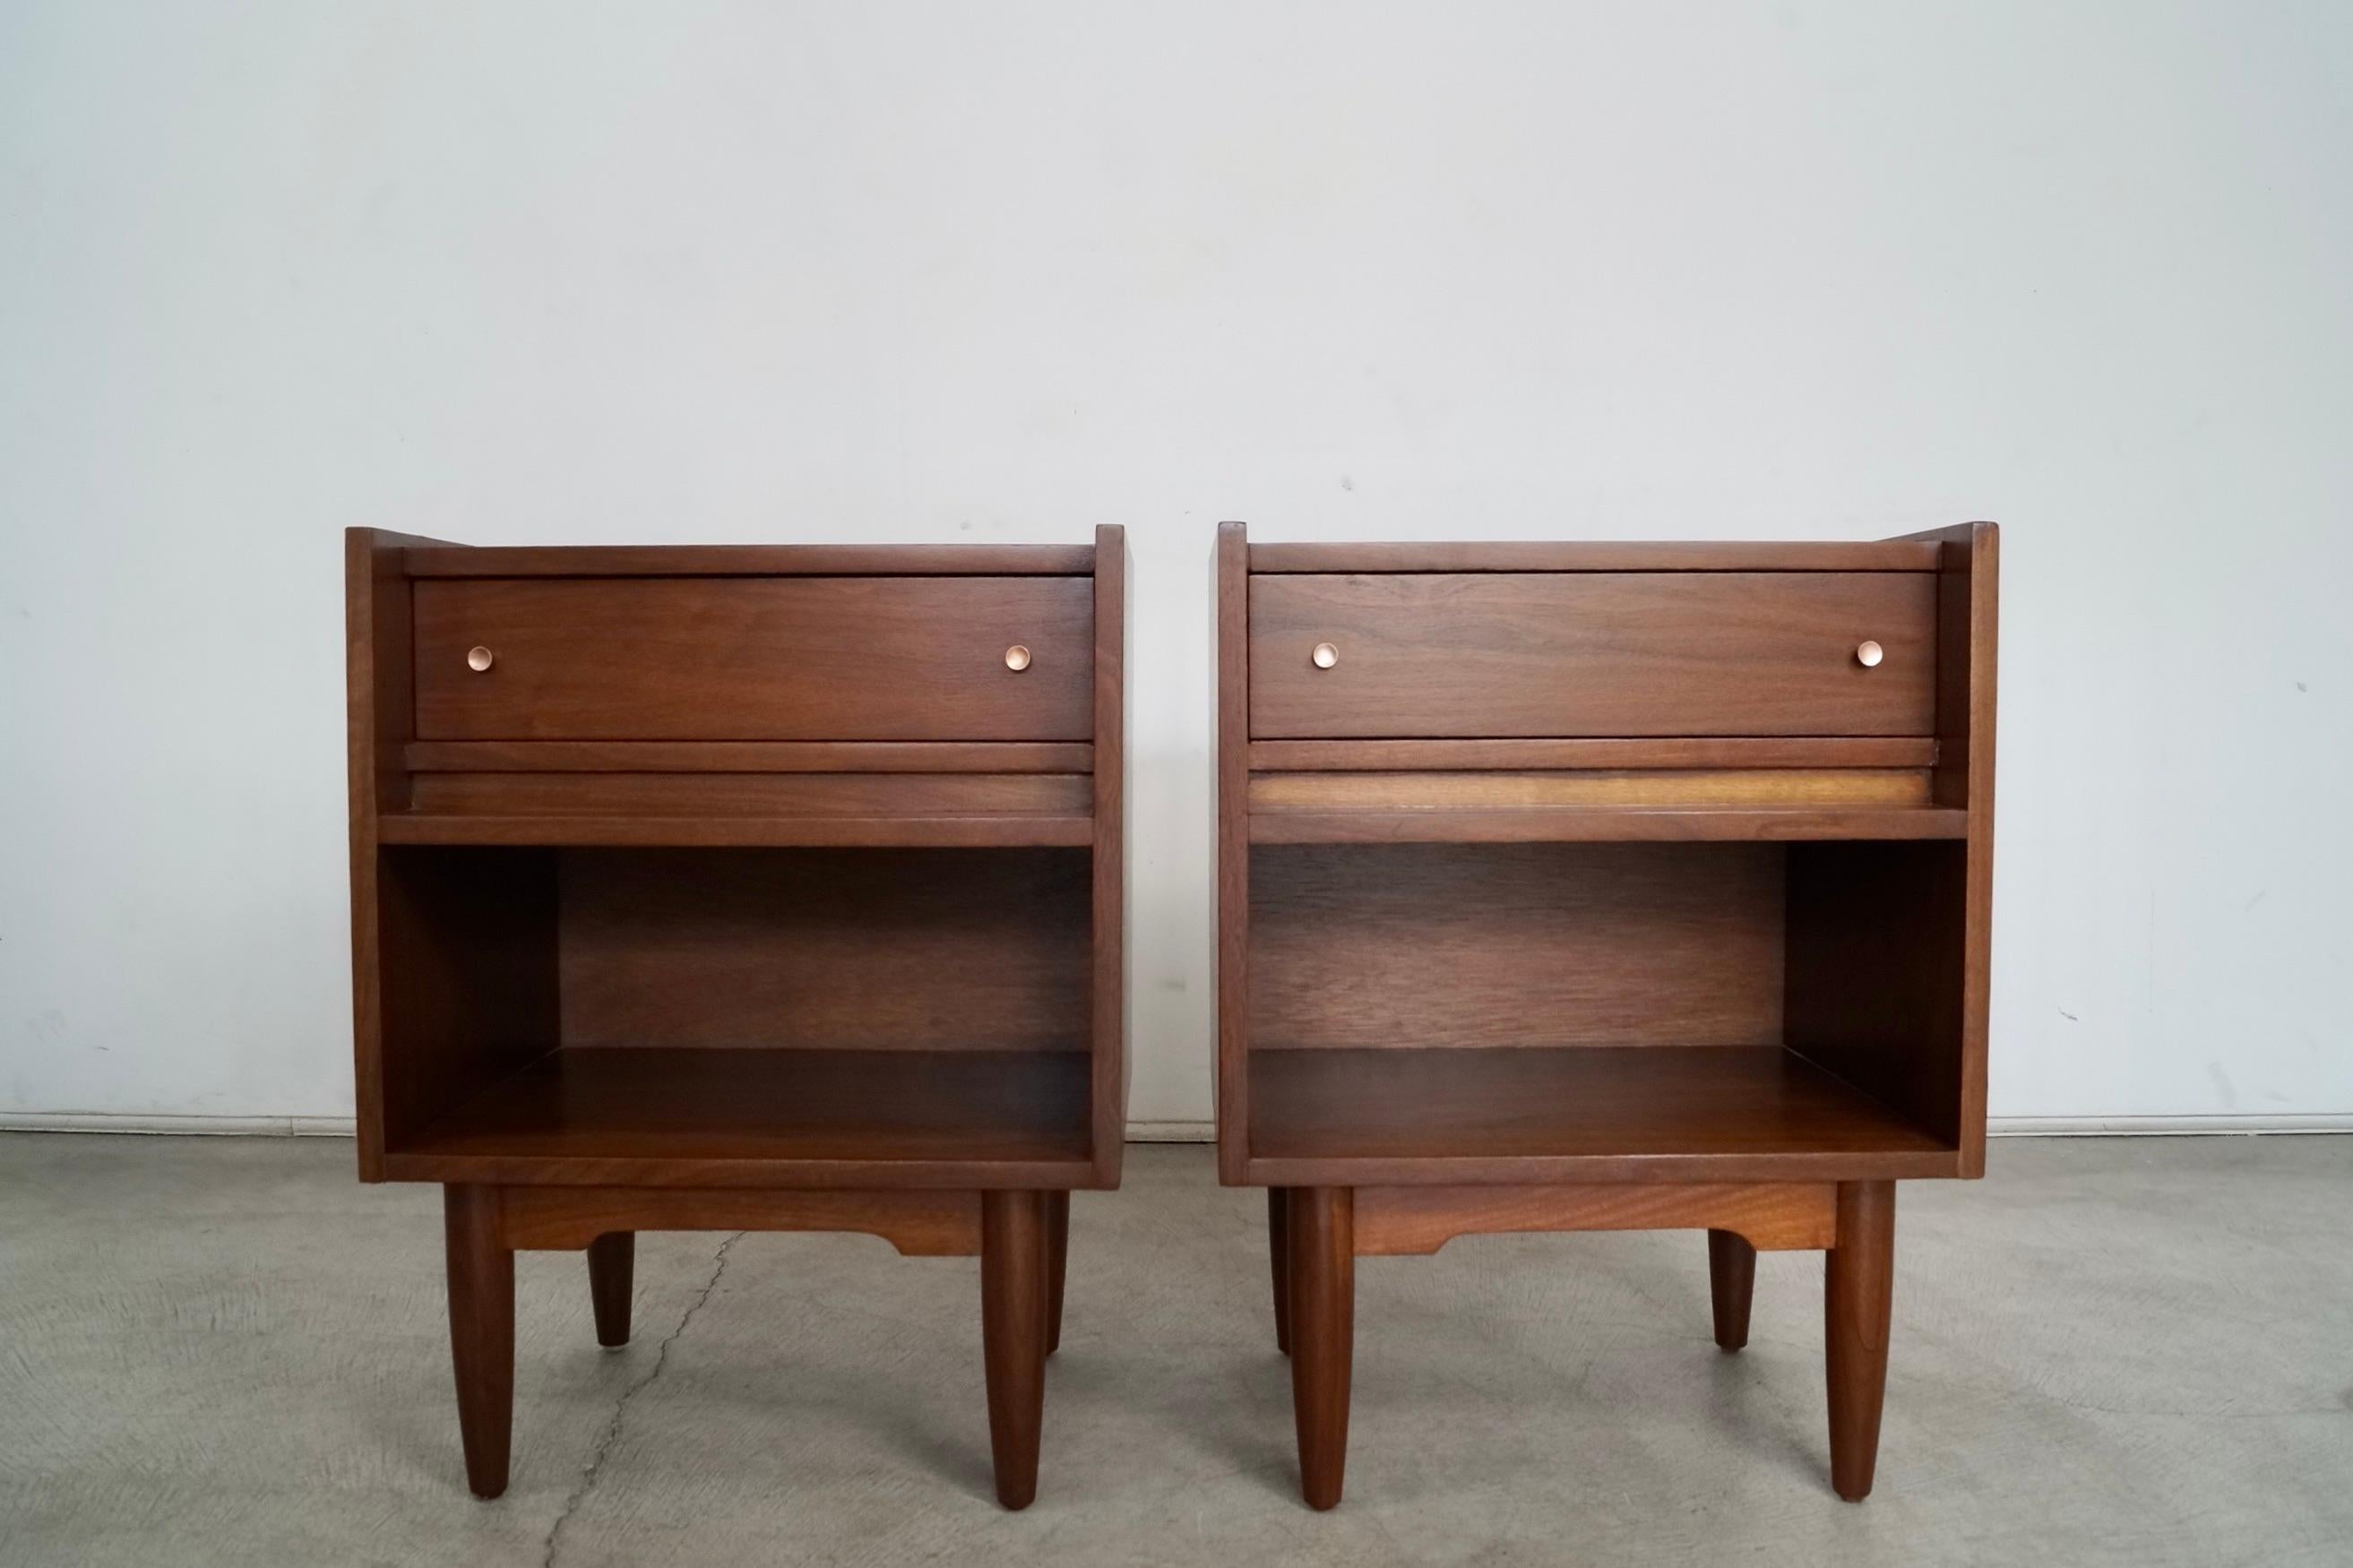 Pair of original vintage Mid-century Modern night stands for sale. They have a very unique design, and have been professionally refinished. They are made of walnut, and are high-quality bedside tables. They have a drawer that is dovetailed on both